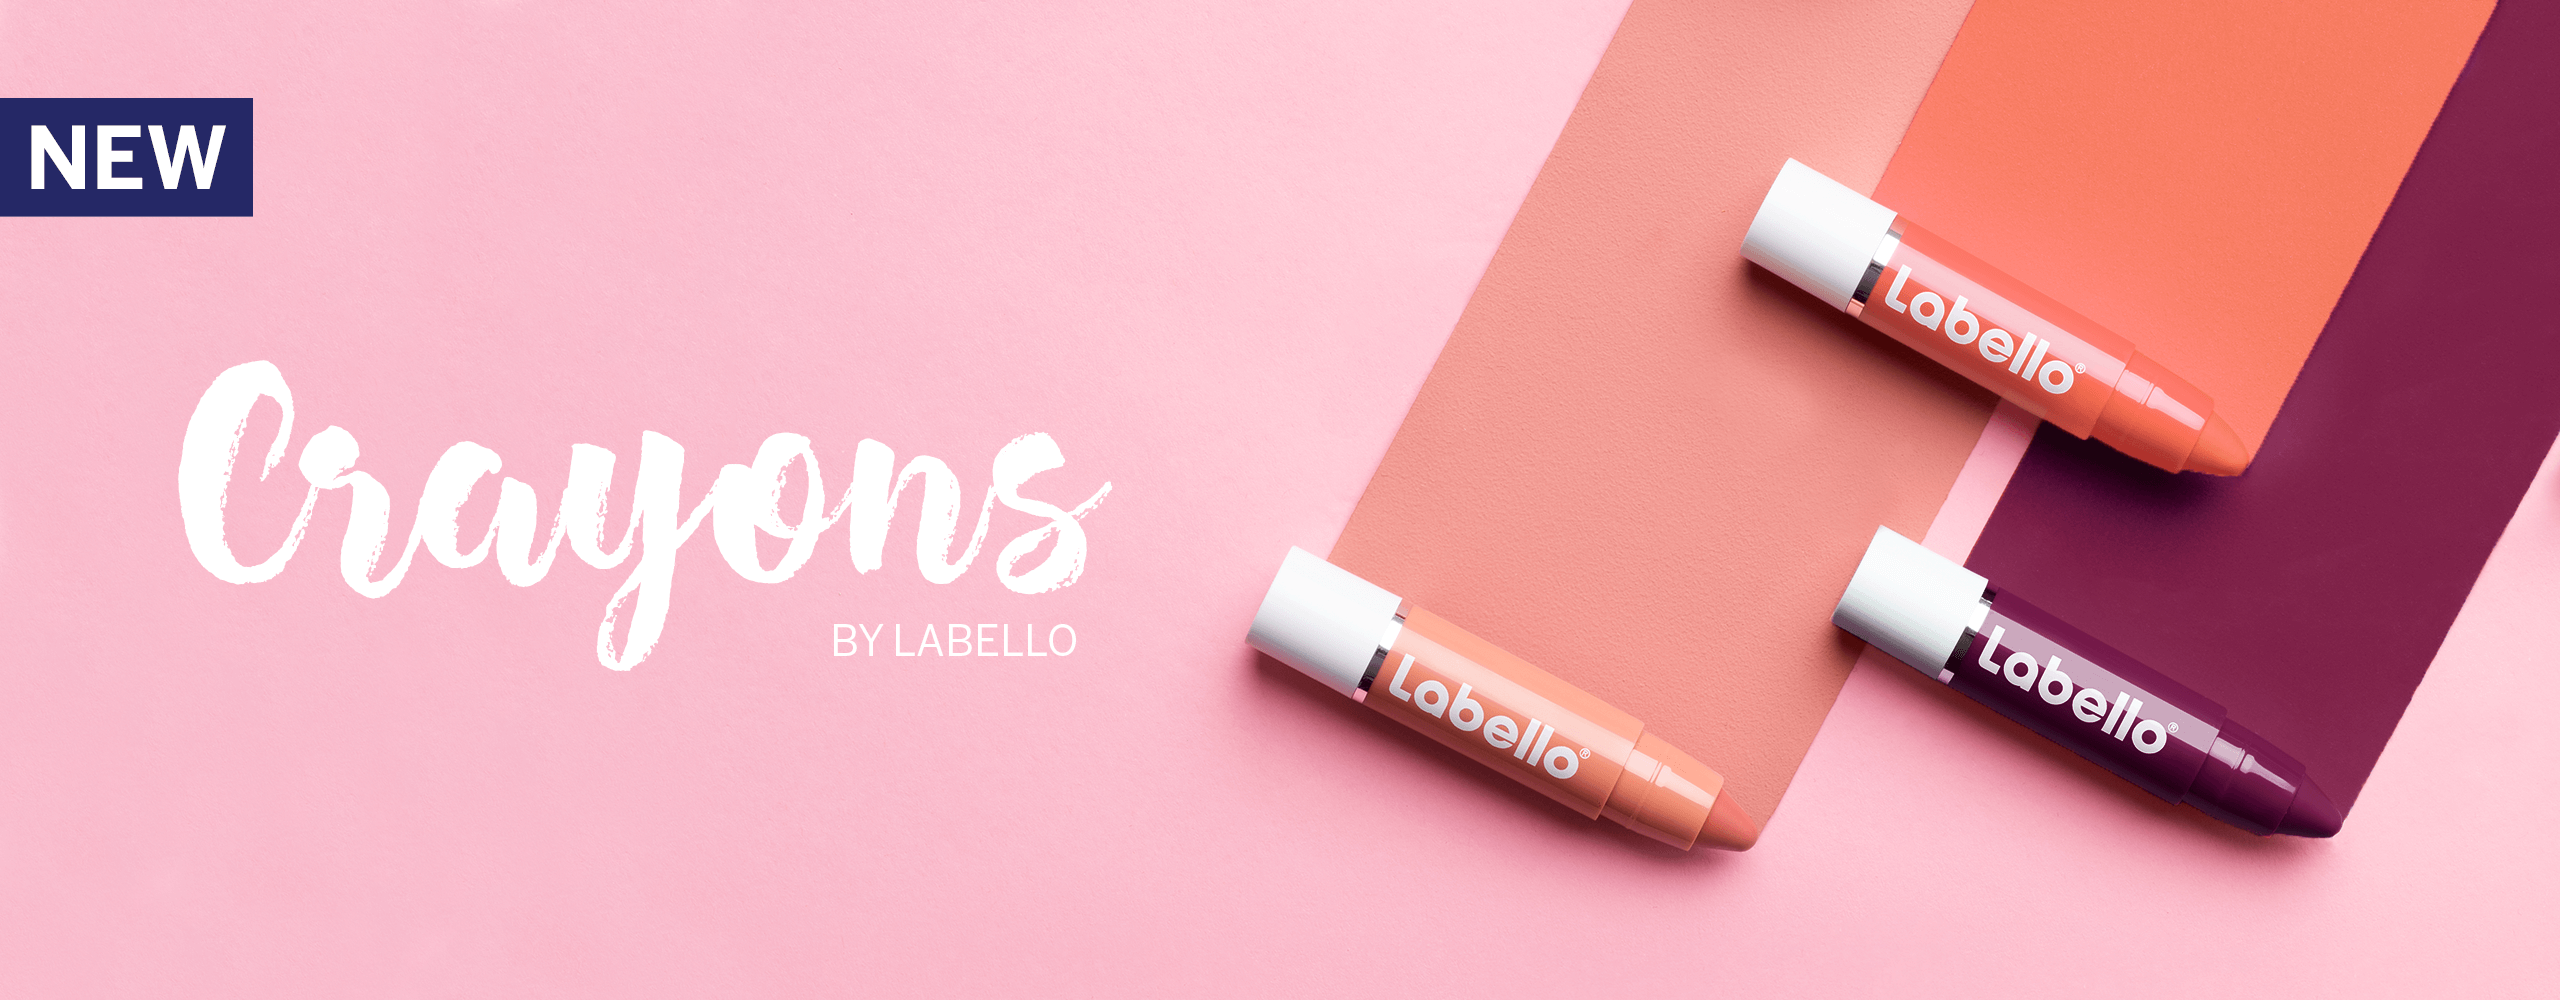 Labello-Crayons-Campaign-Page-Banner2